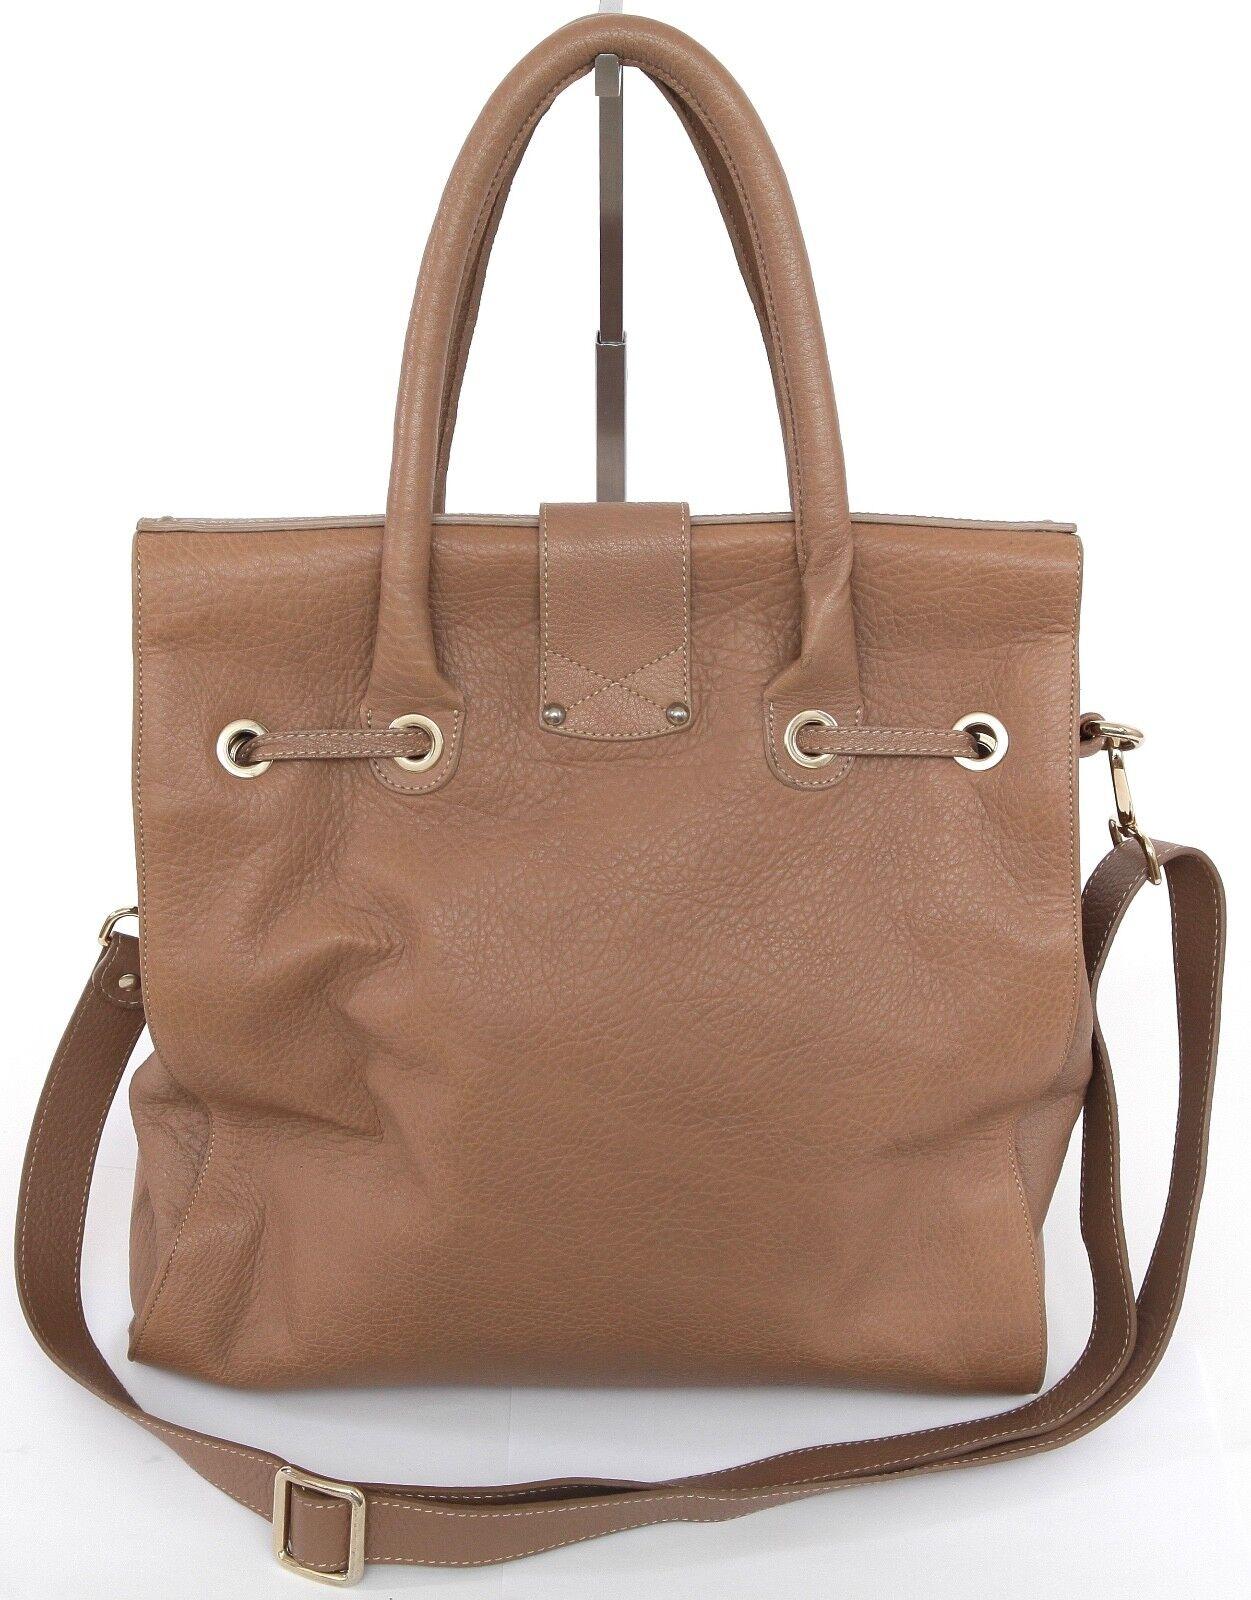 GUARANTEED AUTHENTIC JIMMY CHOO LARGE ROSABEL TAN GRAINED LEATHER BAG

Retail excluding taxes, $1,795



Design: 
  - Absolutely fabulous tan grained leather top satchel/shoulder bag.
   - Two double rolled handles.
  - Shiny gold-tone metal